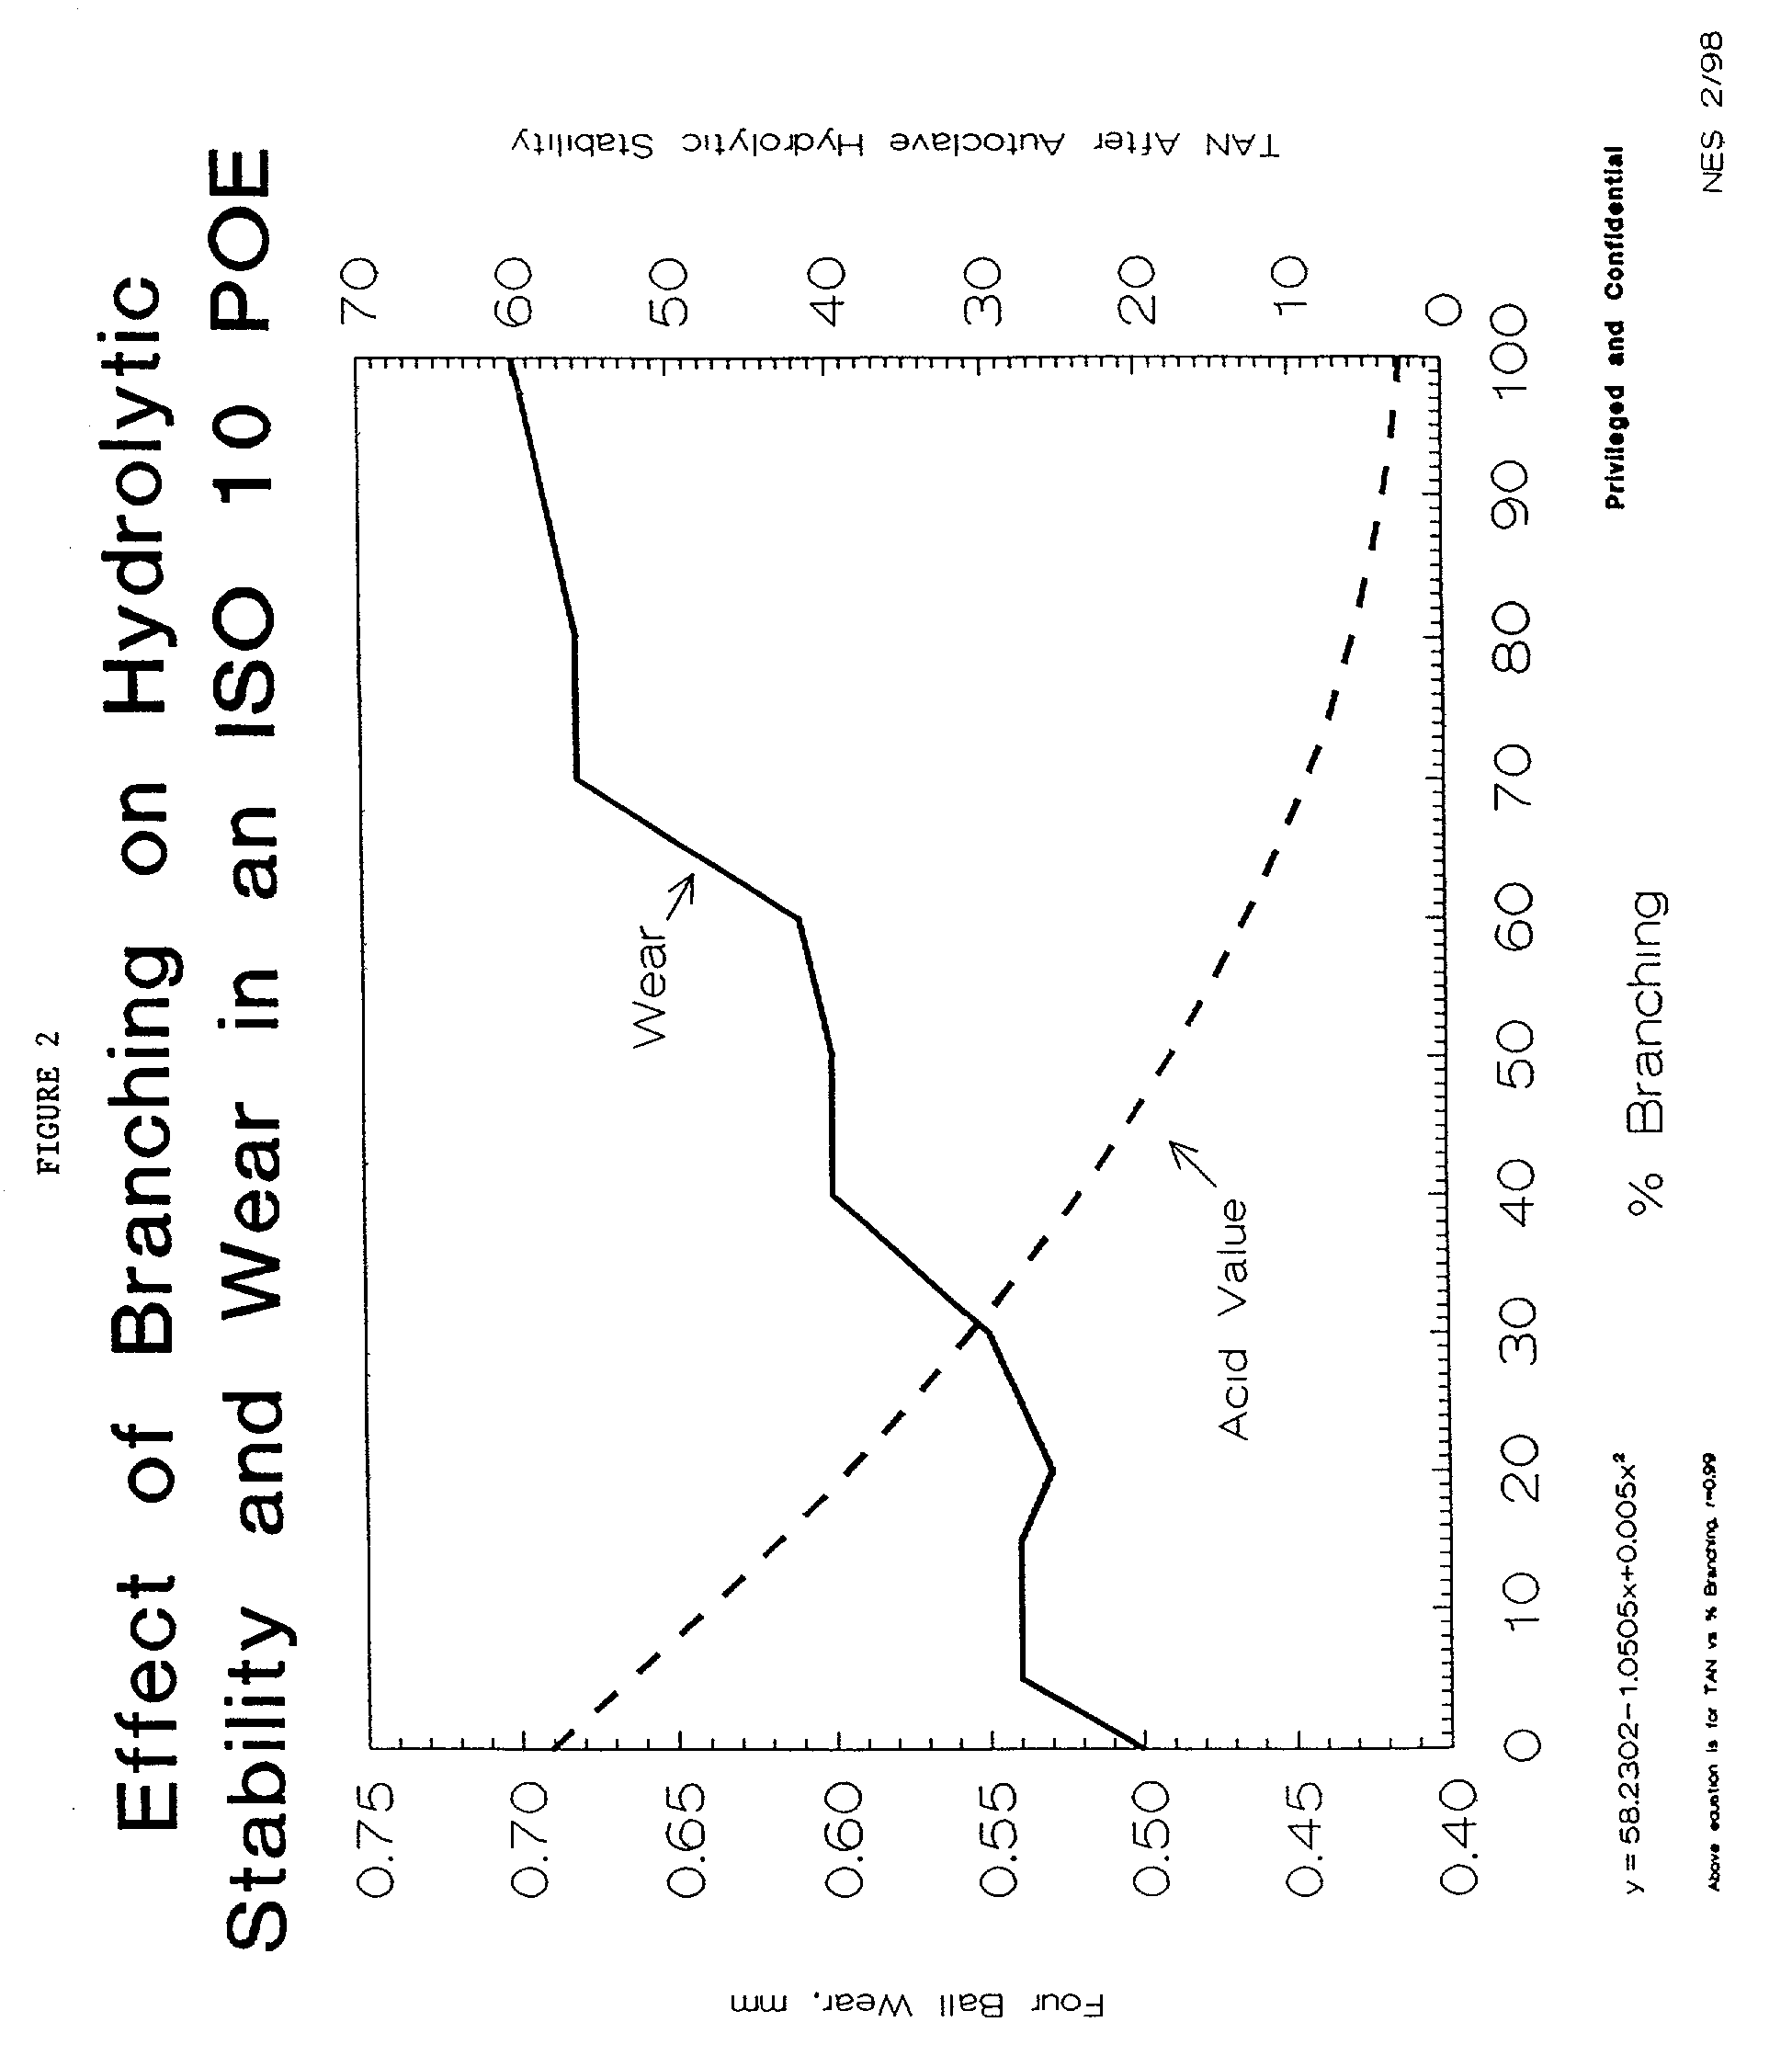 Method of reducing wear of metal surfaces and maintaining a hydrolytically stable environment in refrigeration equipment during the operation of such equipment